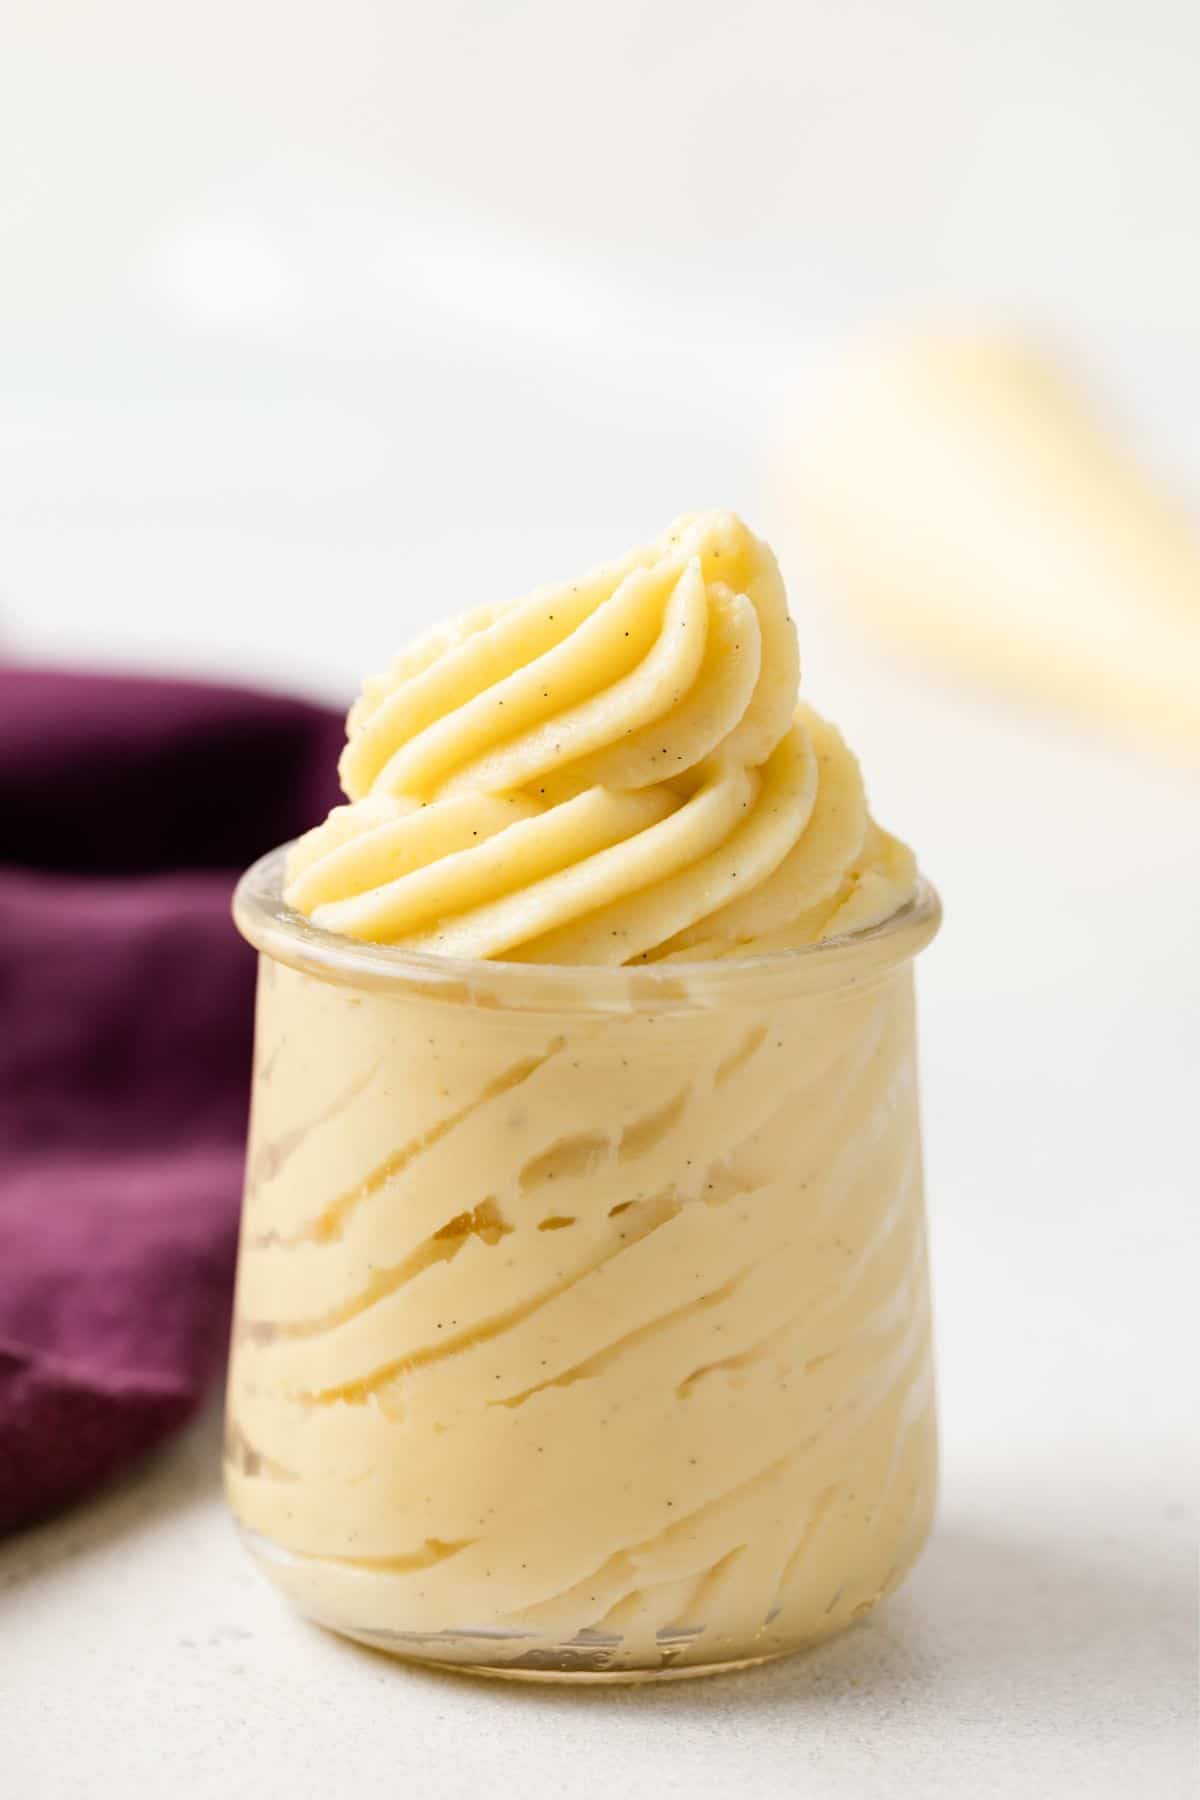 Swirls of pastry cream piped in a glass jar.